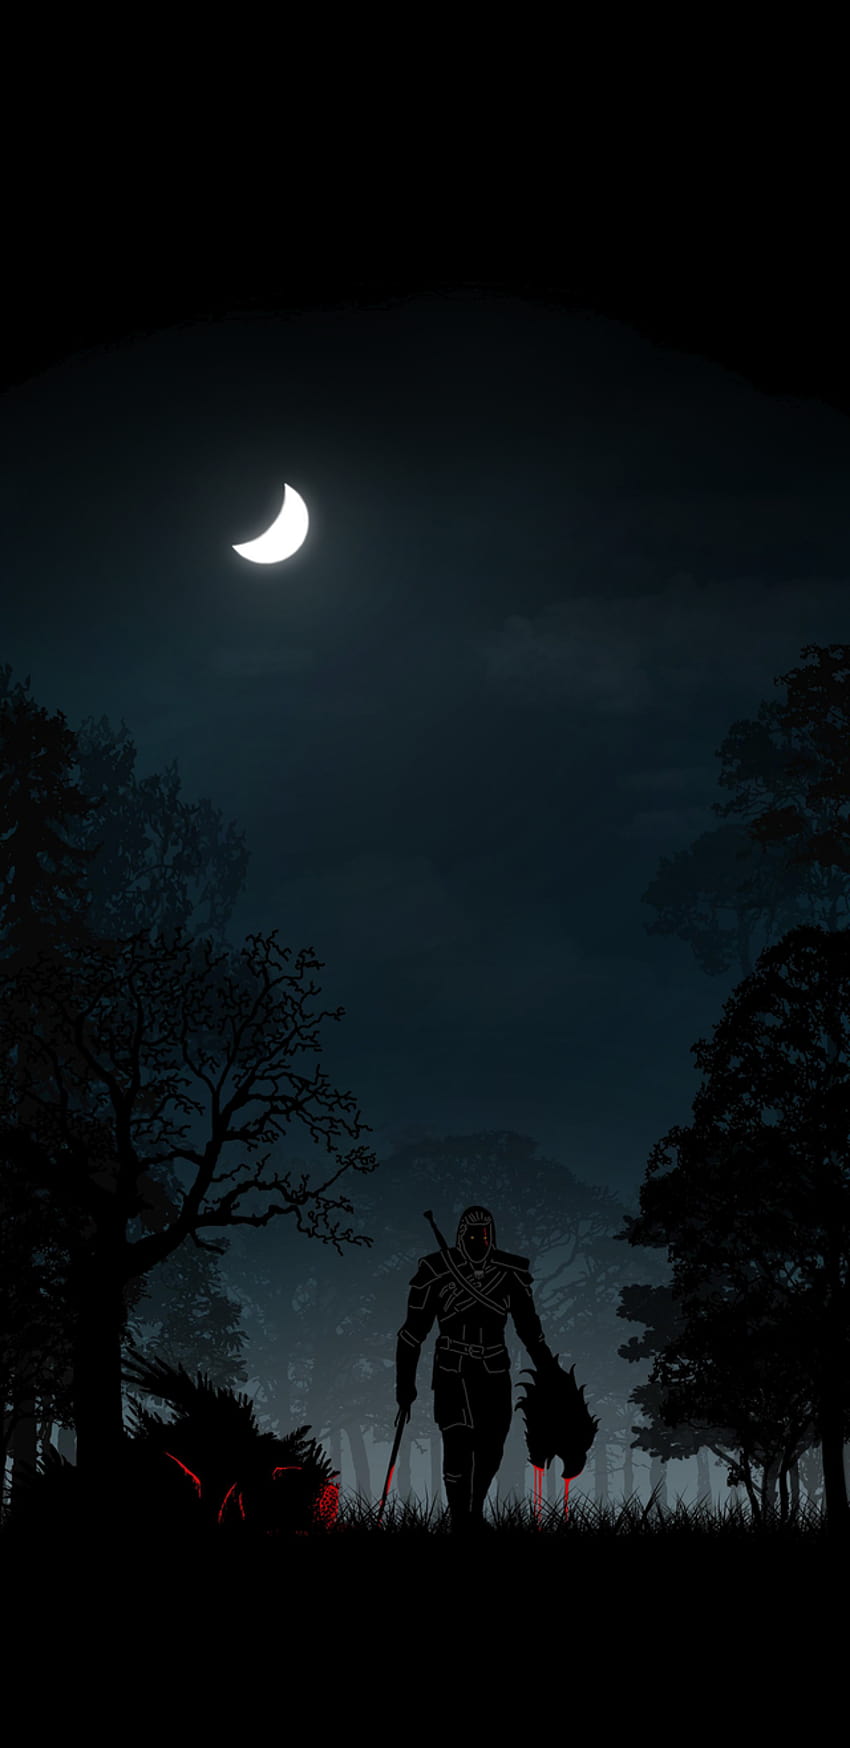 The Witcher 3 / Geralt of Rivia [1440x2960], witcher 3 amoled HD phone wallpaper